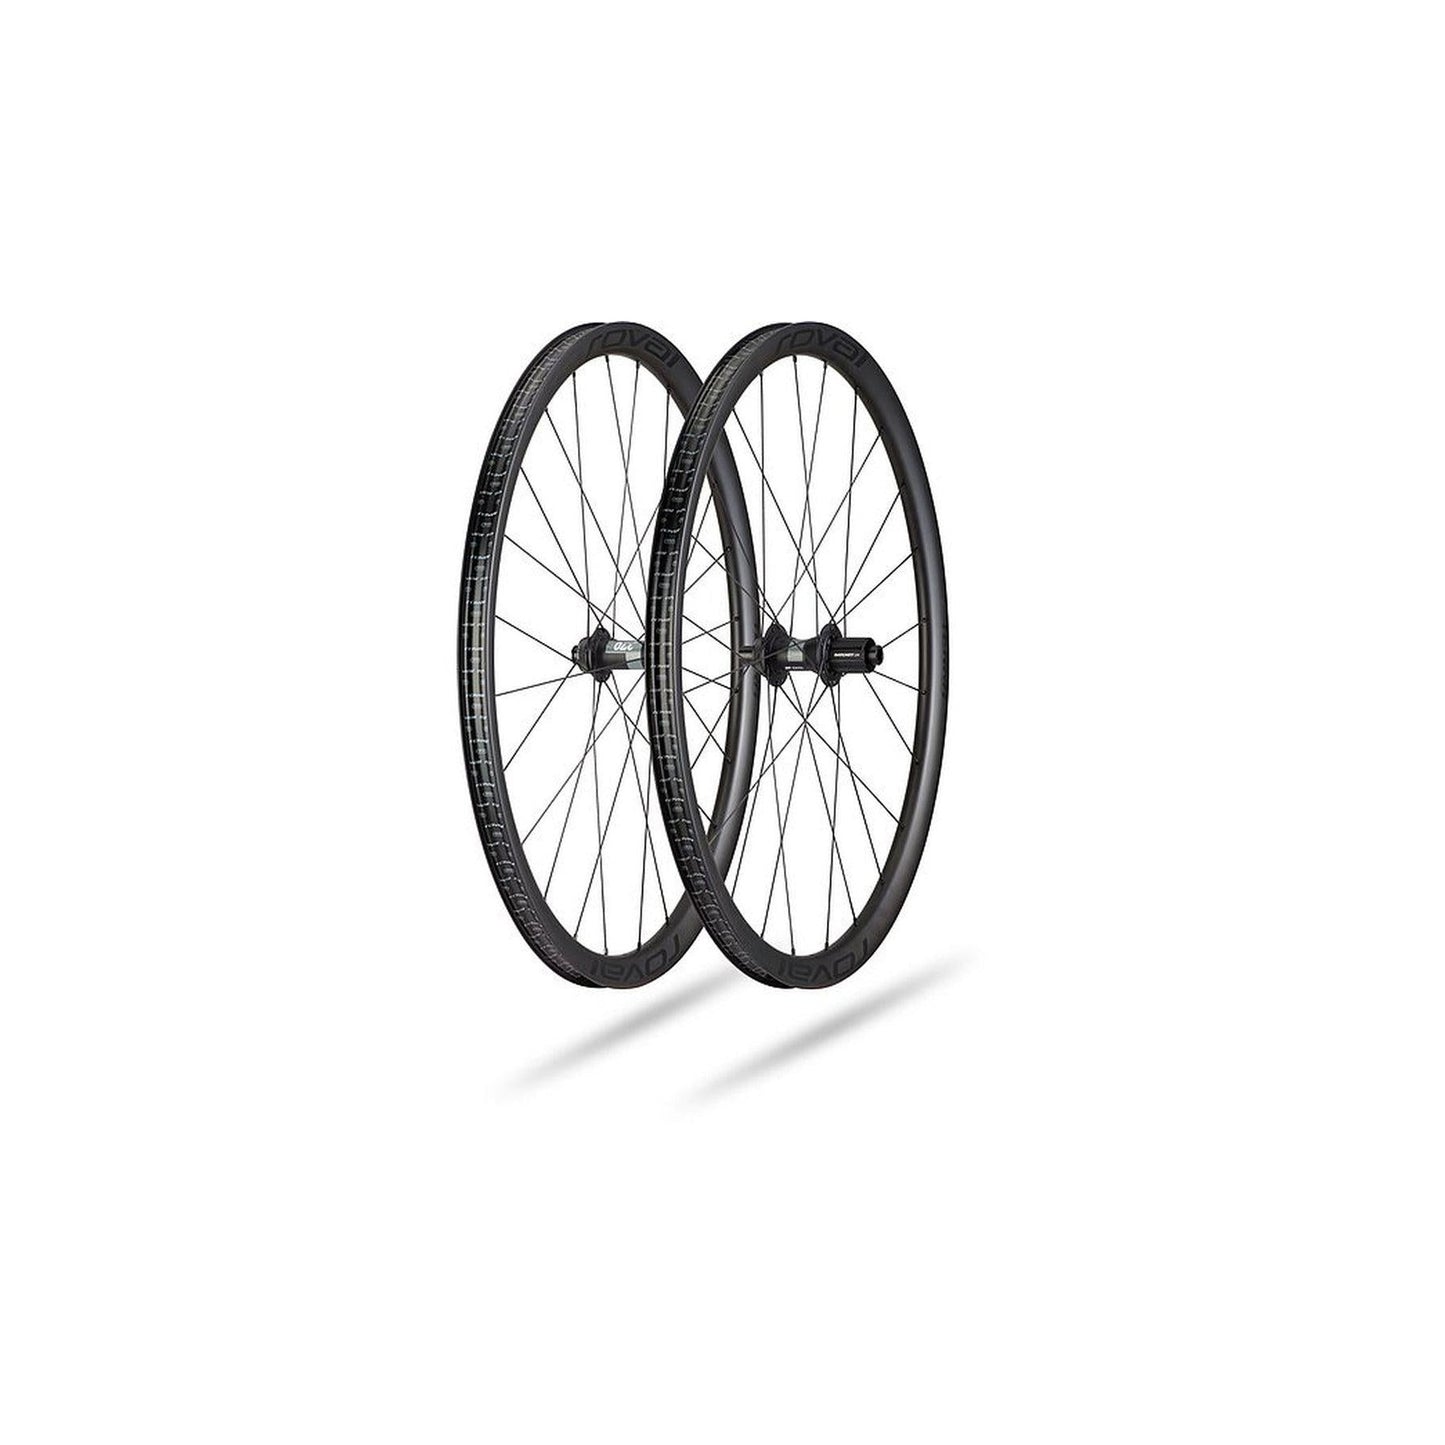 Roval Terra C Wheelset | completecyclist - Taking the notion of combining flagship performance with workhorse dependability one step further, weÕre introducing the Terra C. This shares the same hub and